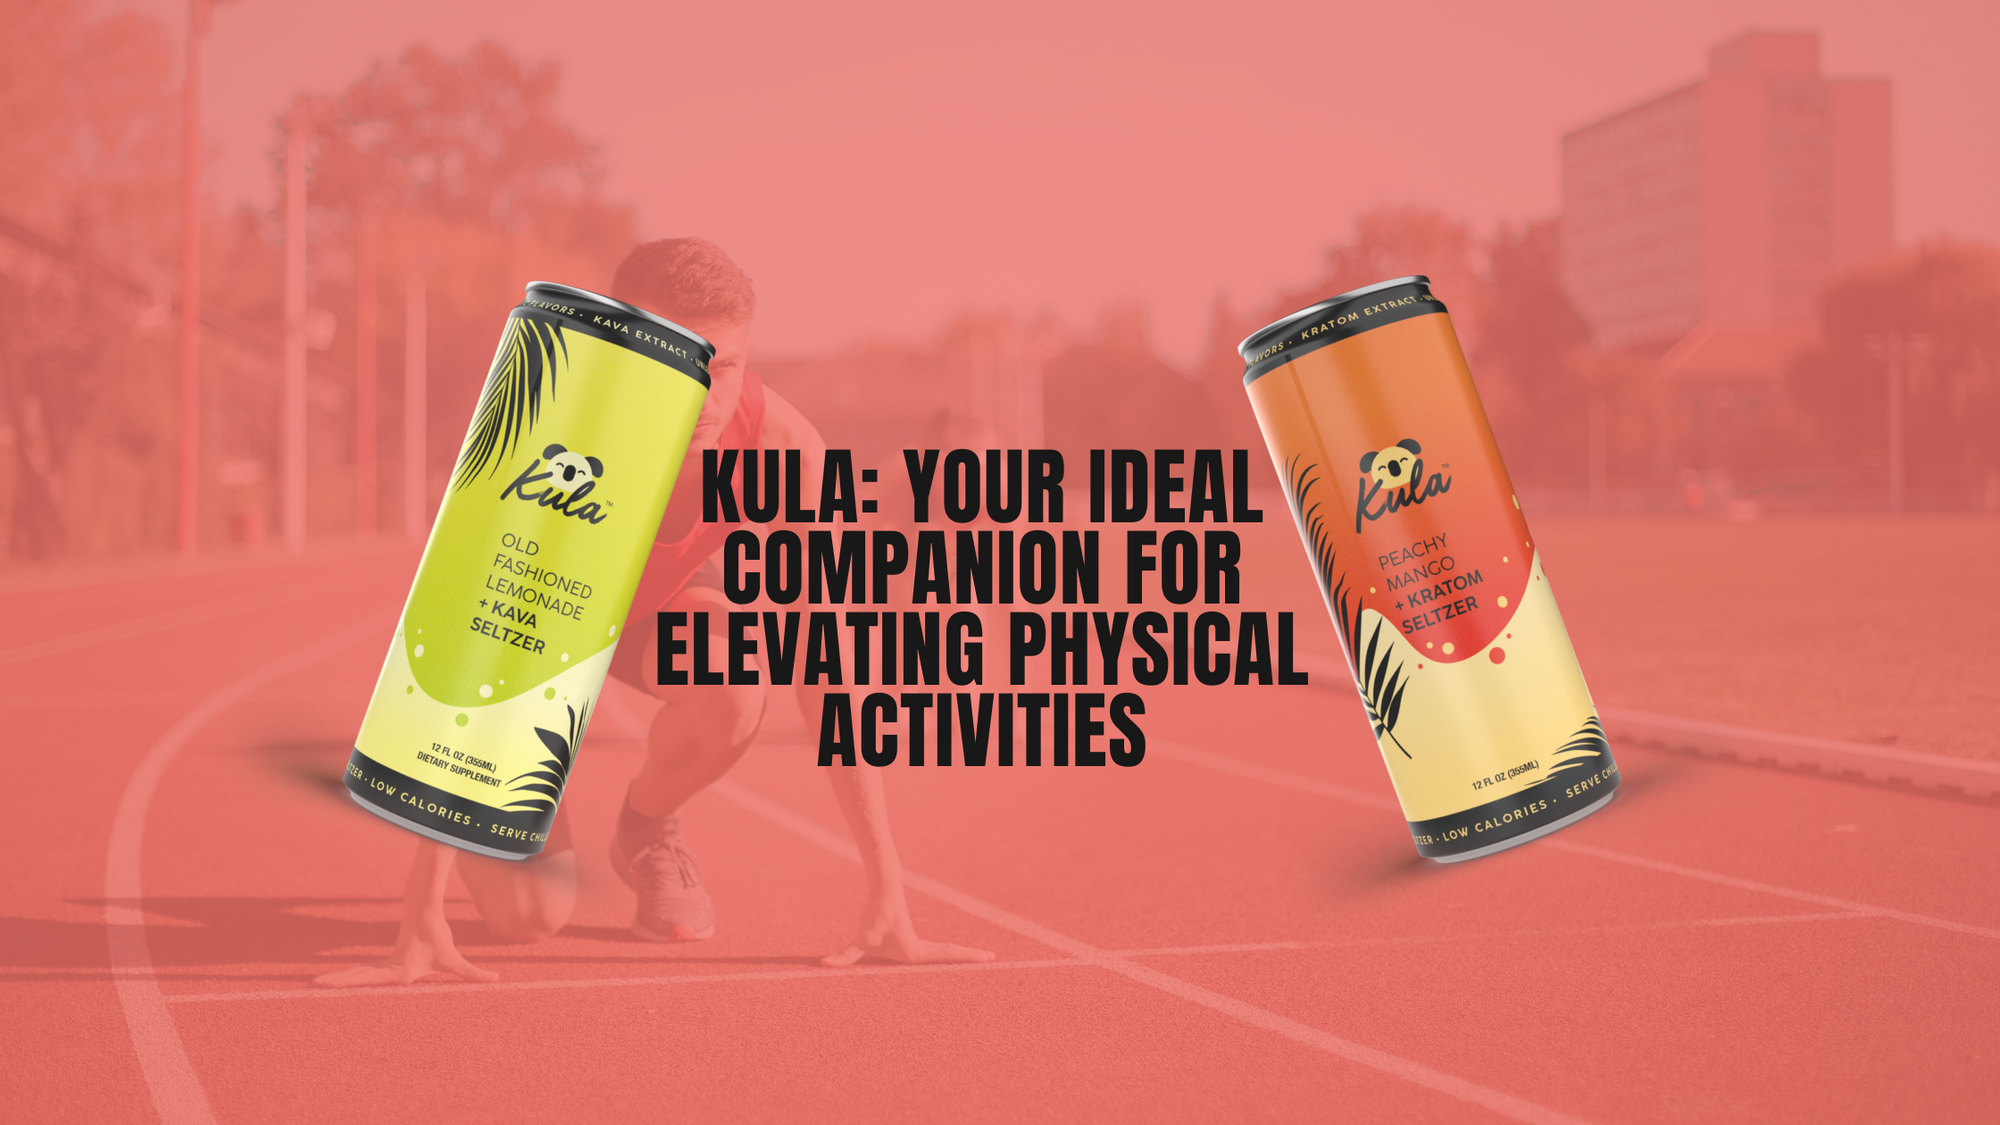 Kula: Your Ideal Companion for Elevating Physical Activities